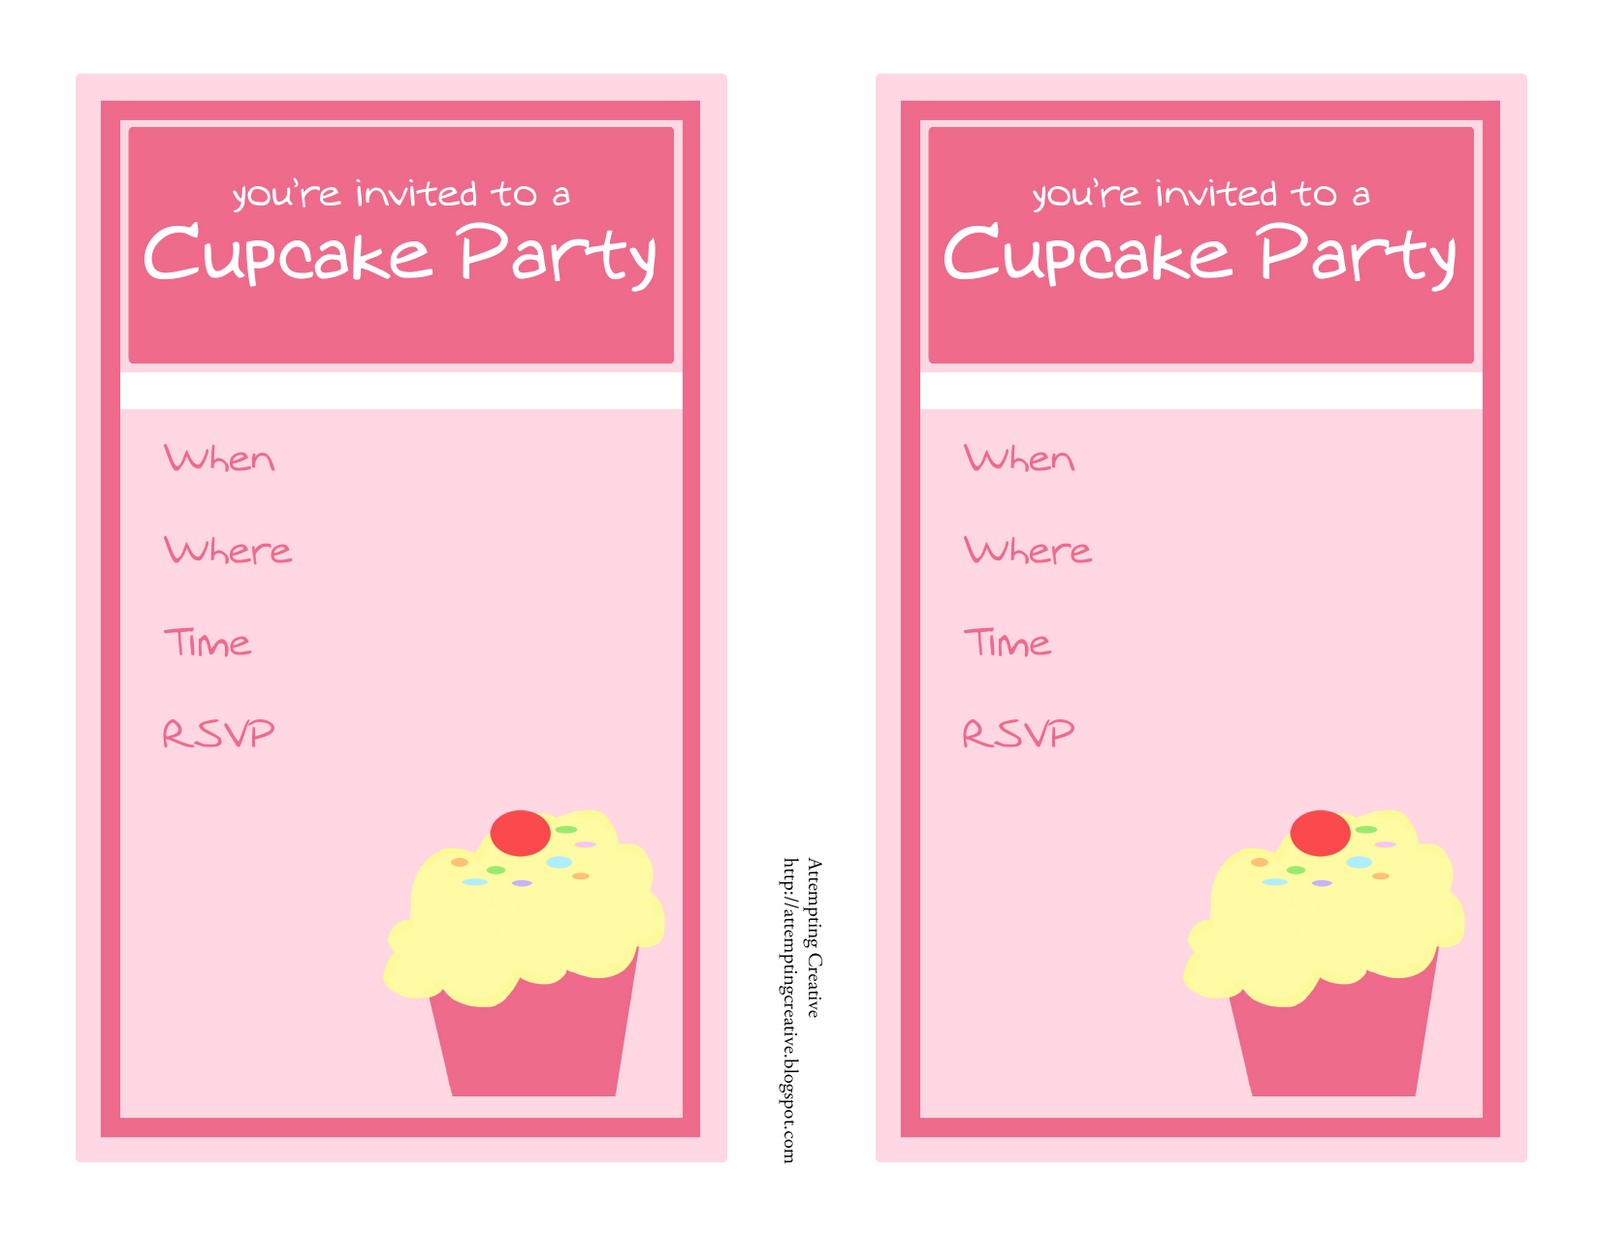 Cupcake Party Invitation Template Free 8 Best Images Of Cupcake Birthday Party Invitation